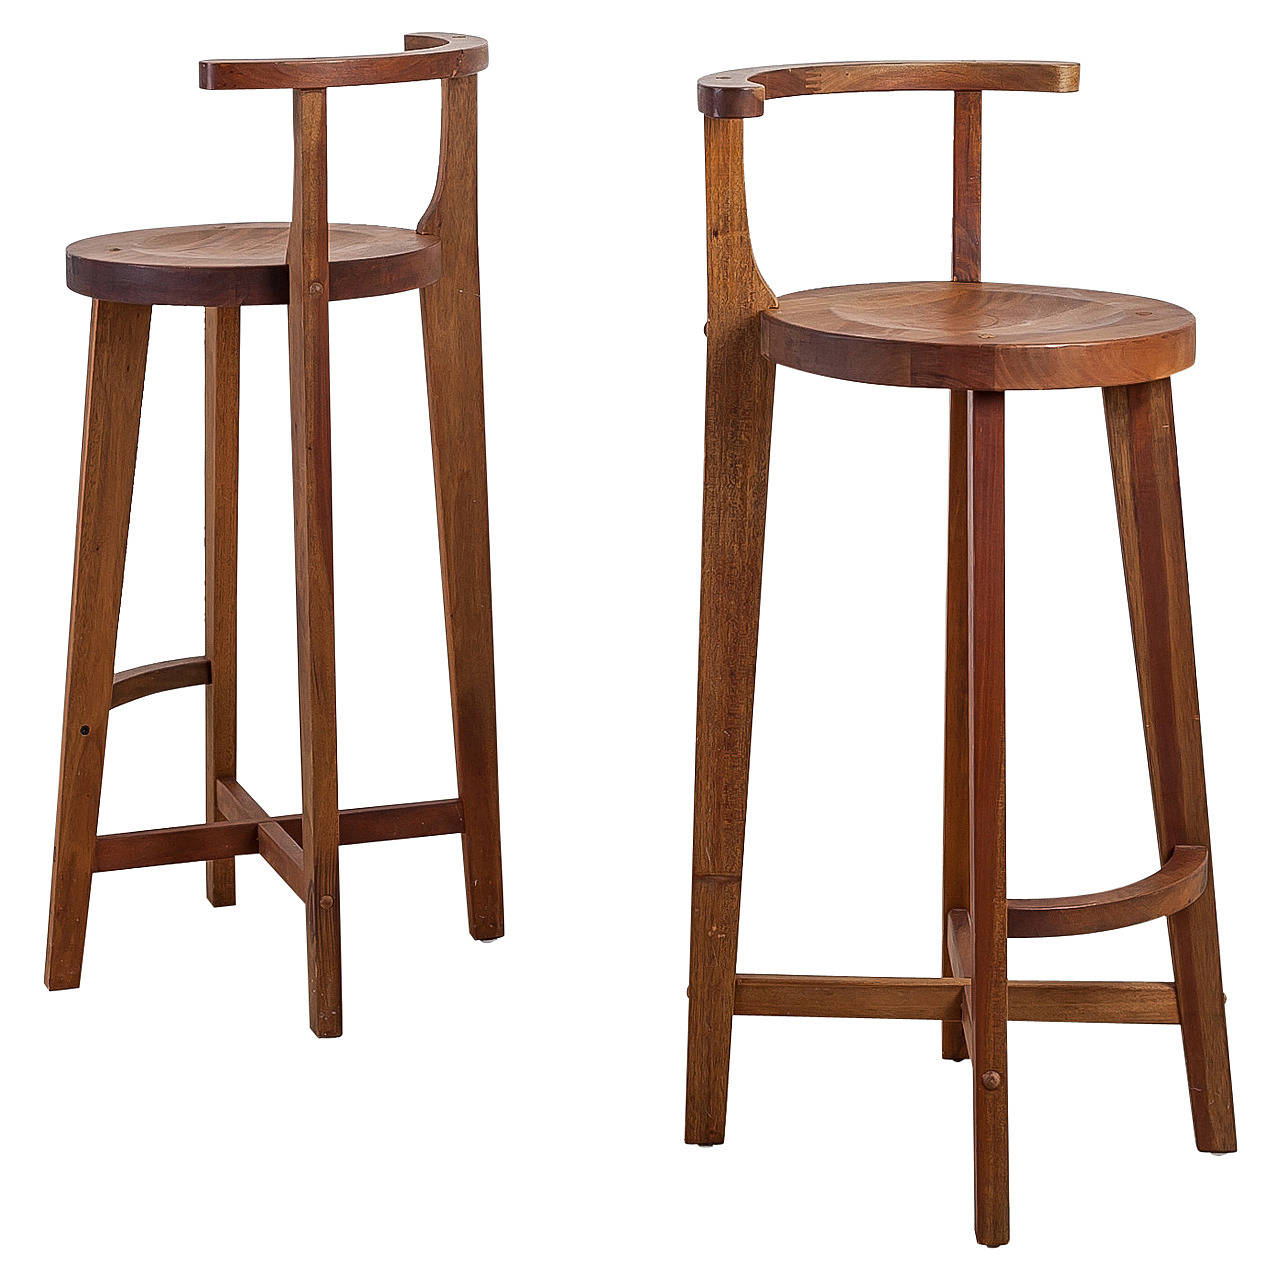 wooden bar stool inside unfinished wooden rods made of wood with back wholesale canada saddle unfinished DOQLTYT